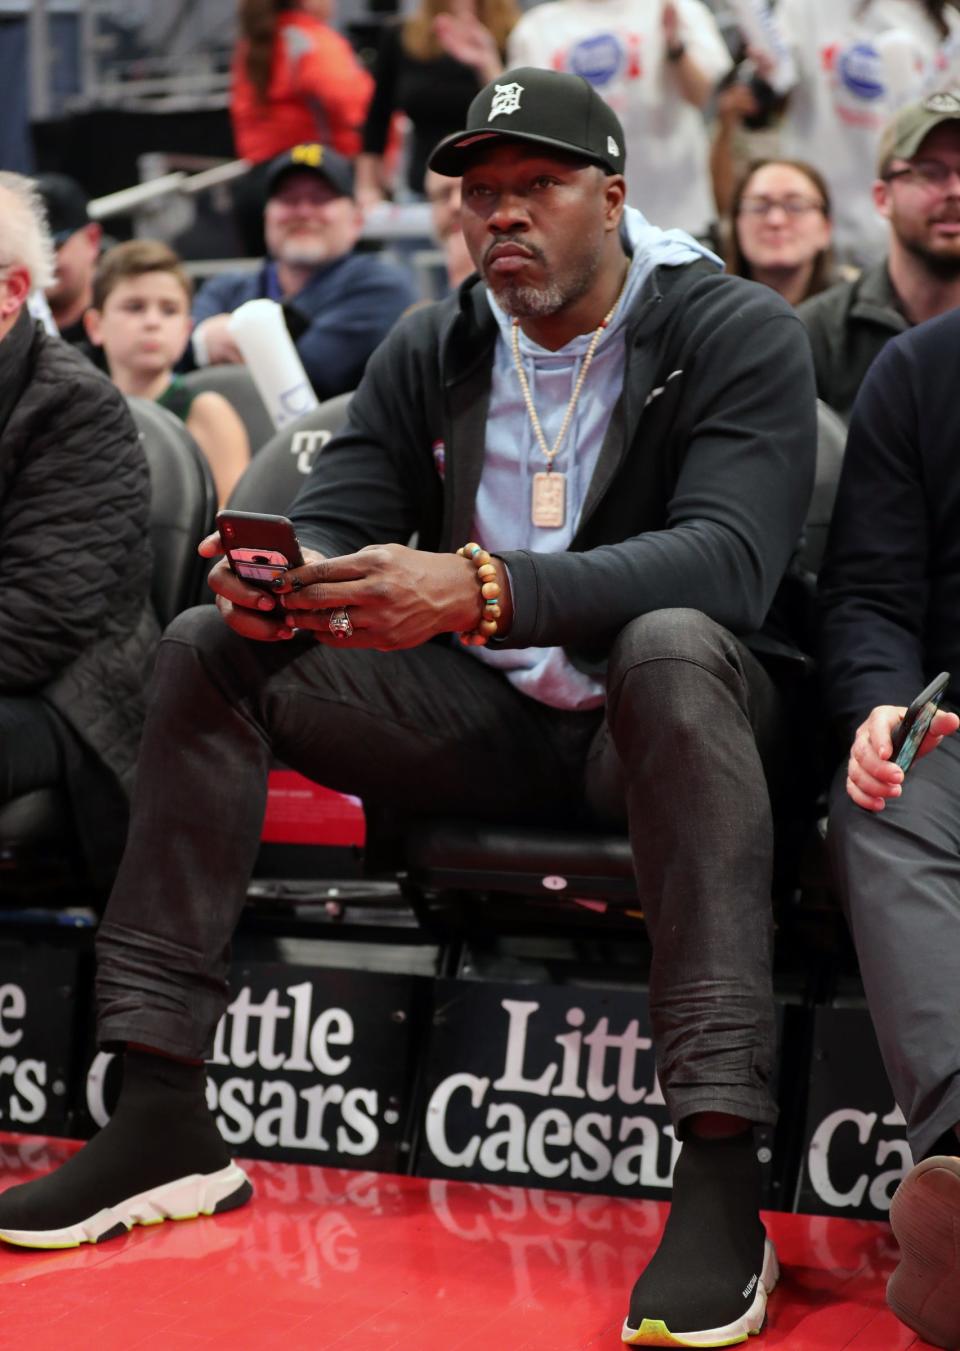 Ben Wallace sits courtside for a Pistons game against Oklahoma City on March 4, 2020 at Little Caesars Arena.